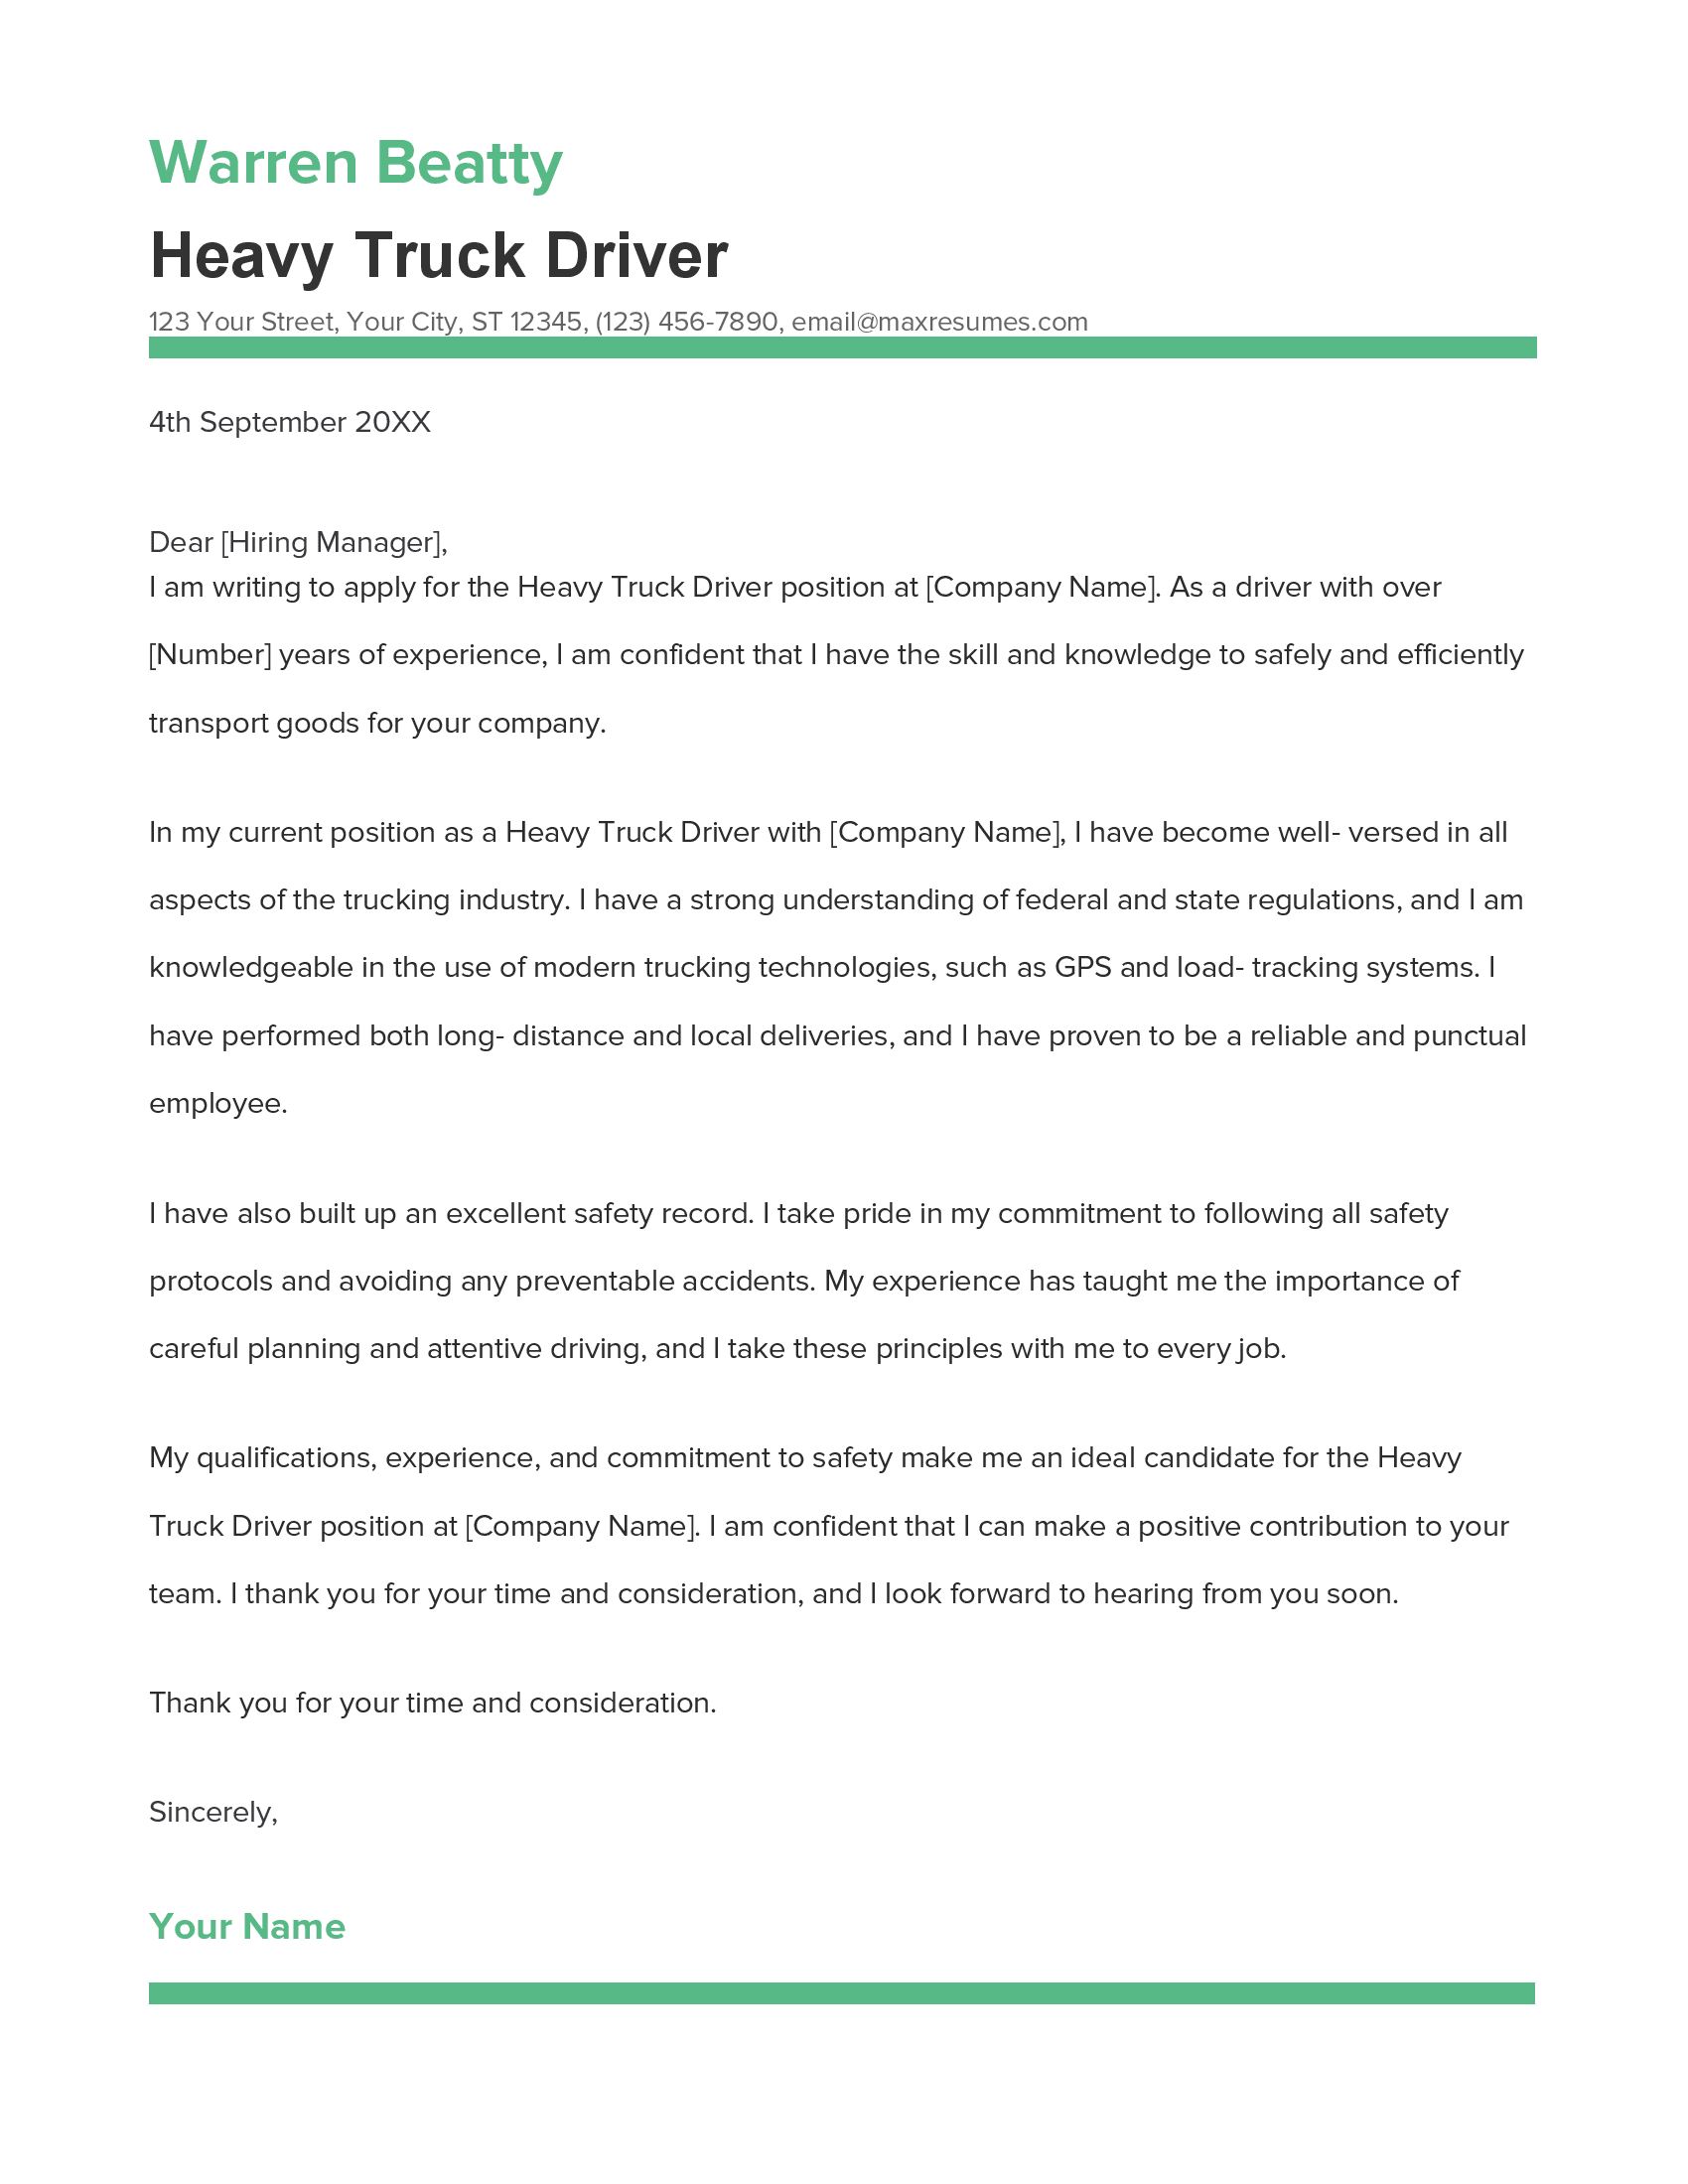 Heavy Truck Driver Cover Letter Example